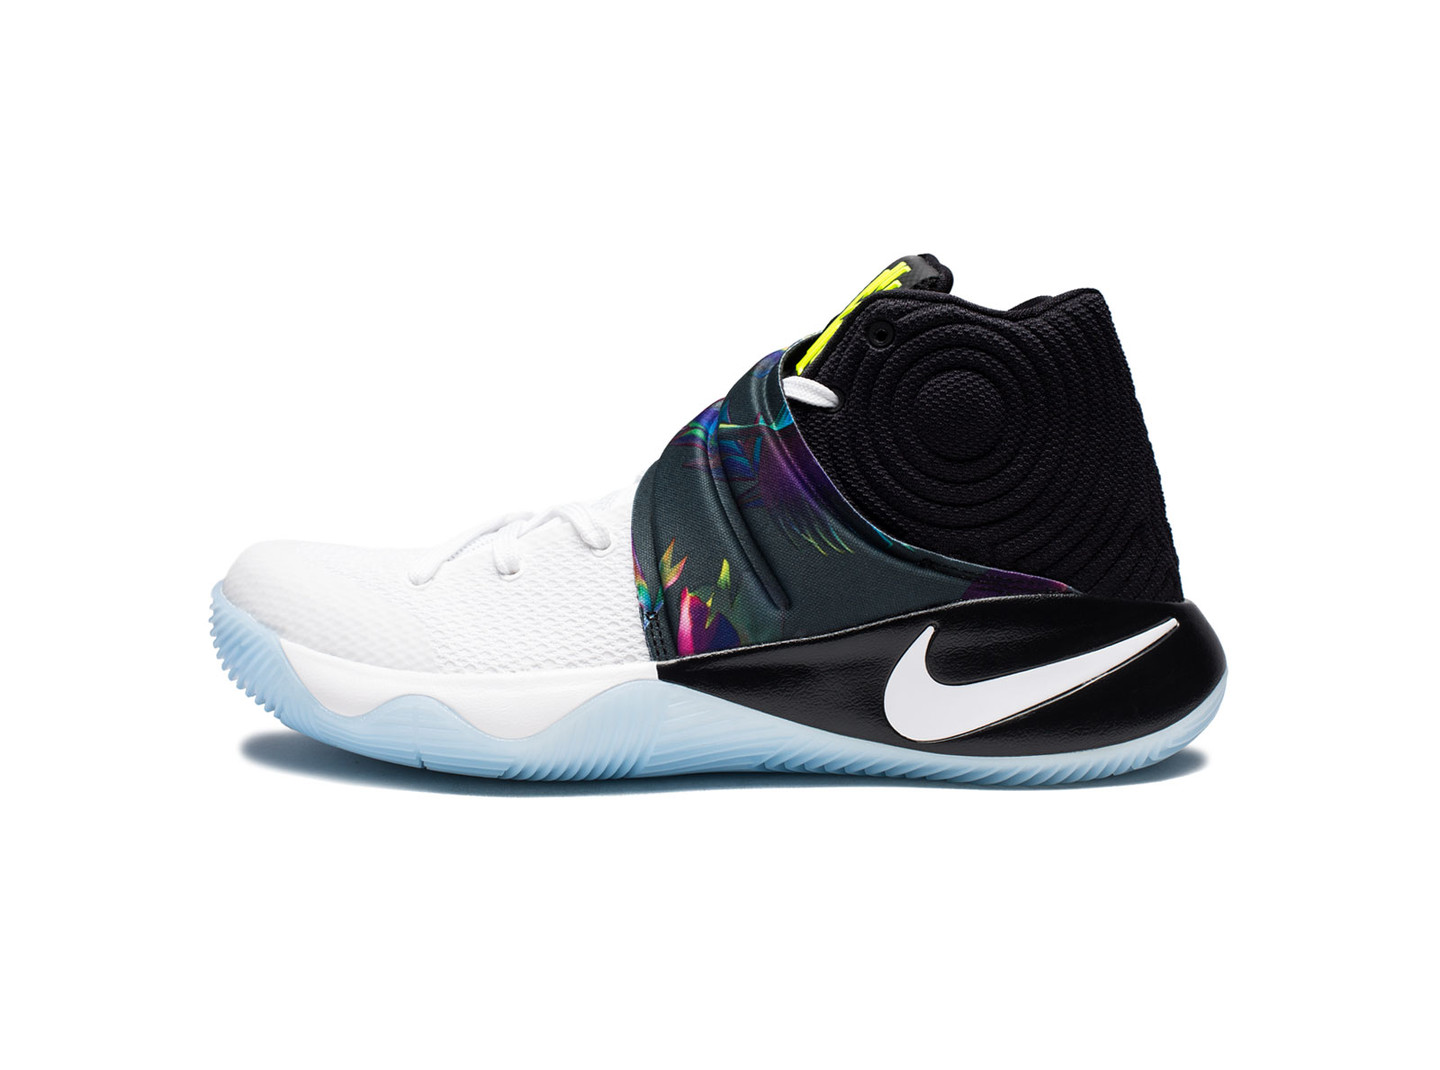 kyrie irving 2's